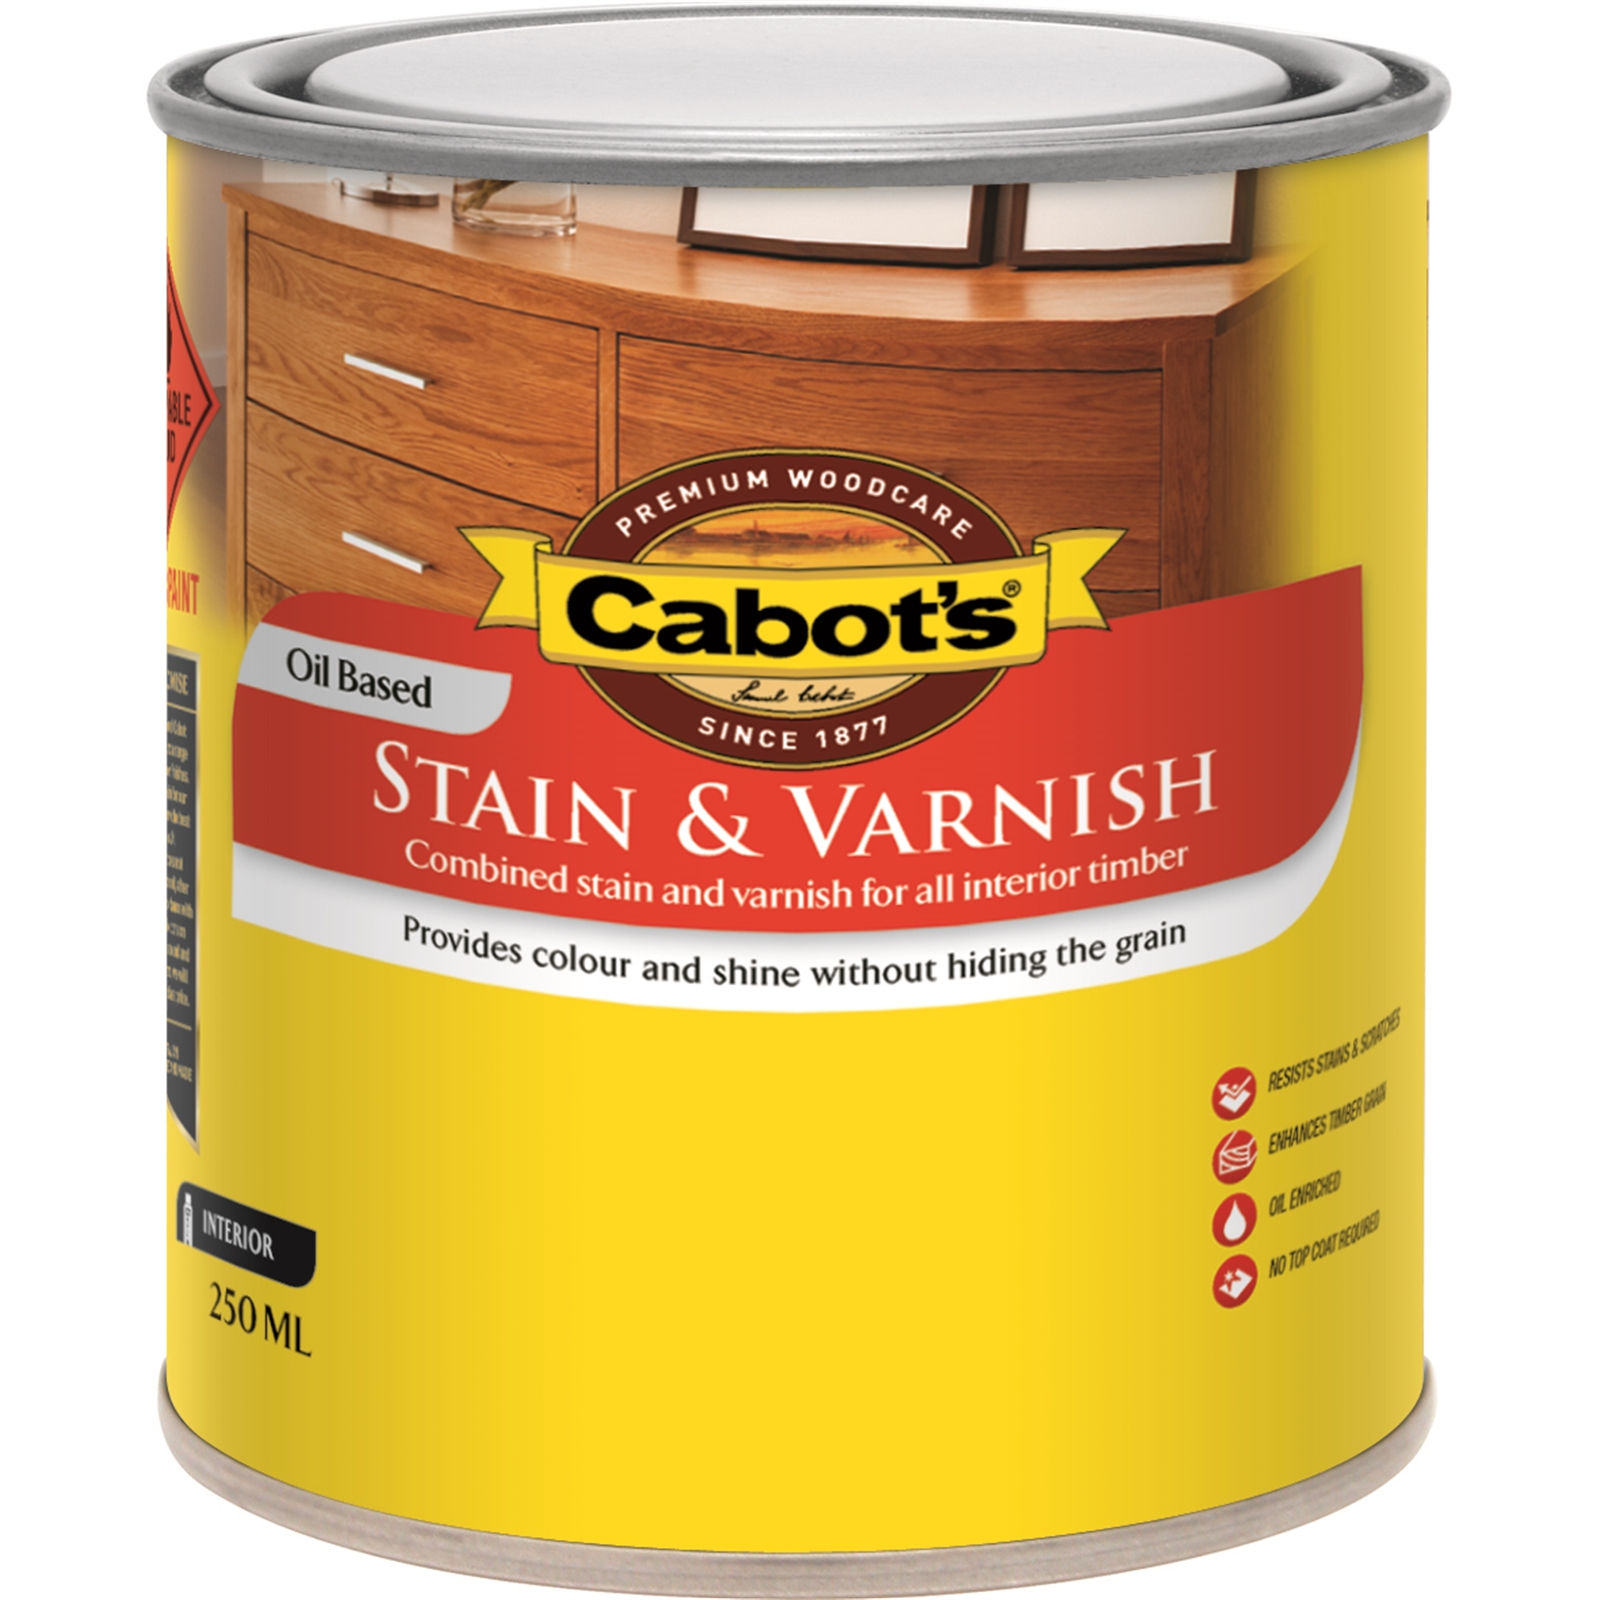 Cabot's 250ml Gloss Tint Base Stain and Varnish